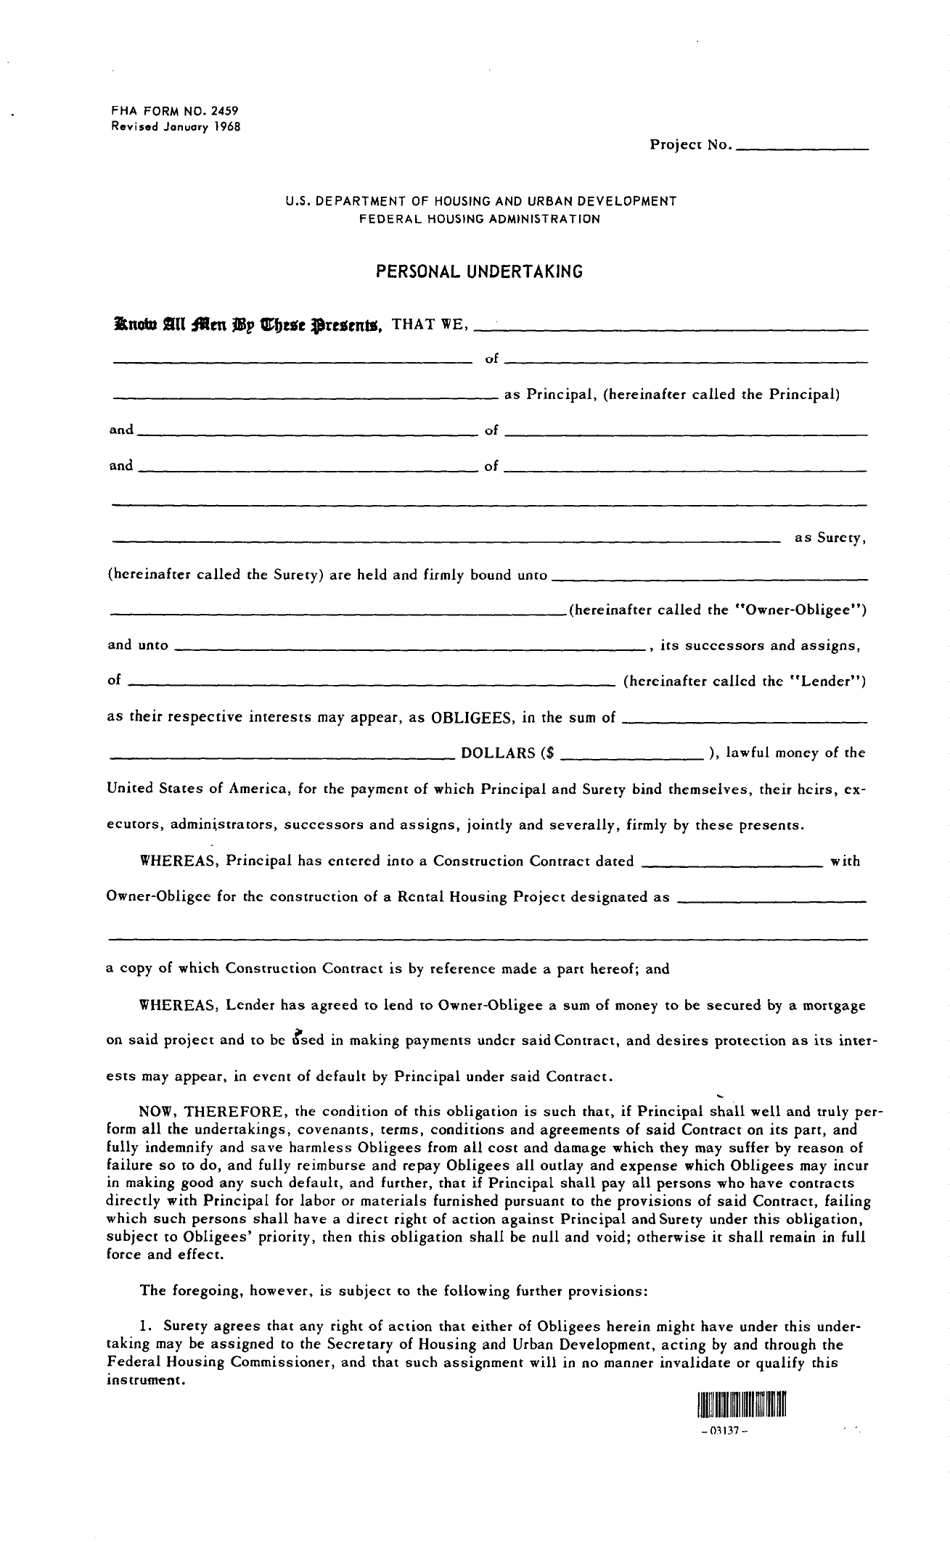 Form FHA-2459 Personal Undertaking, Page 1